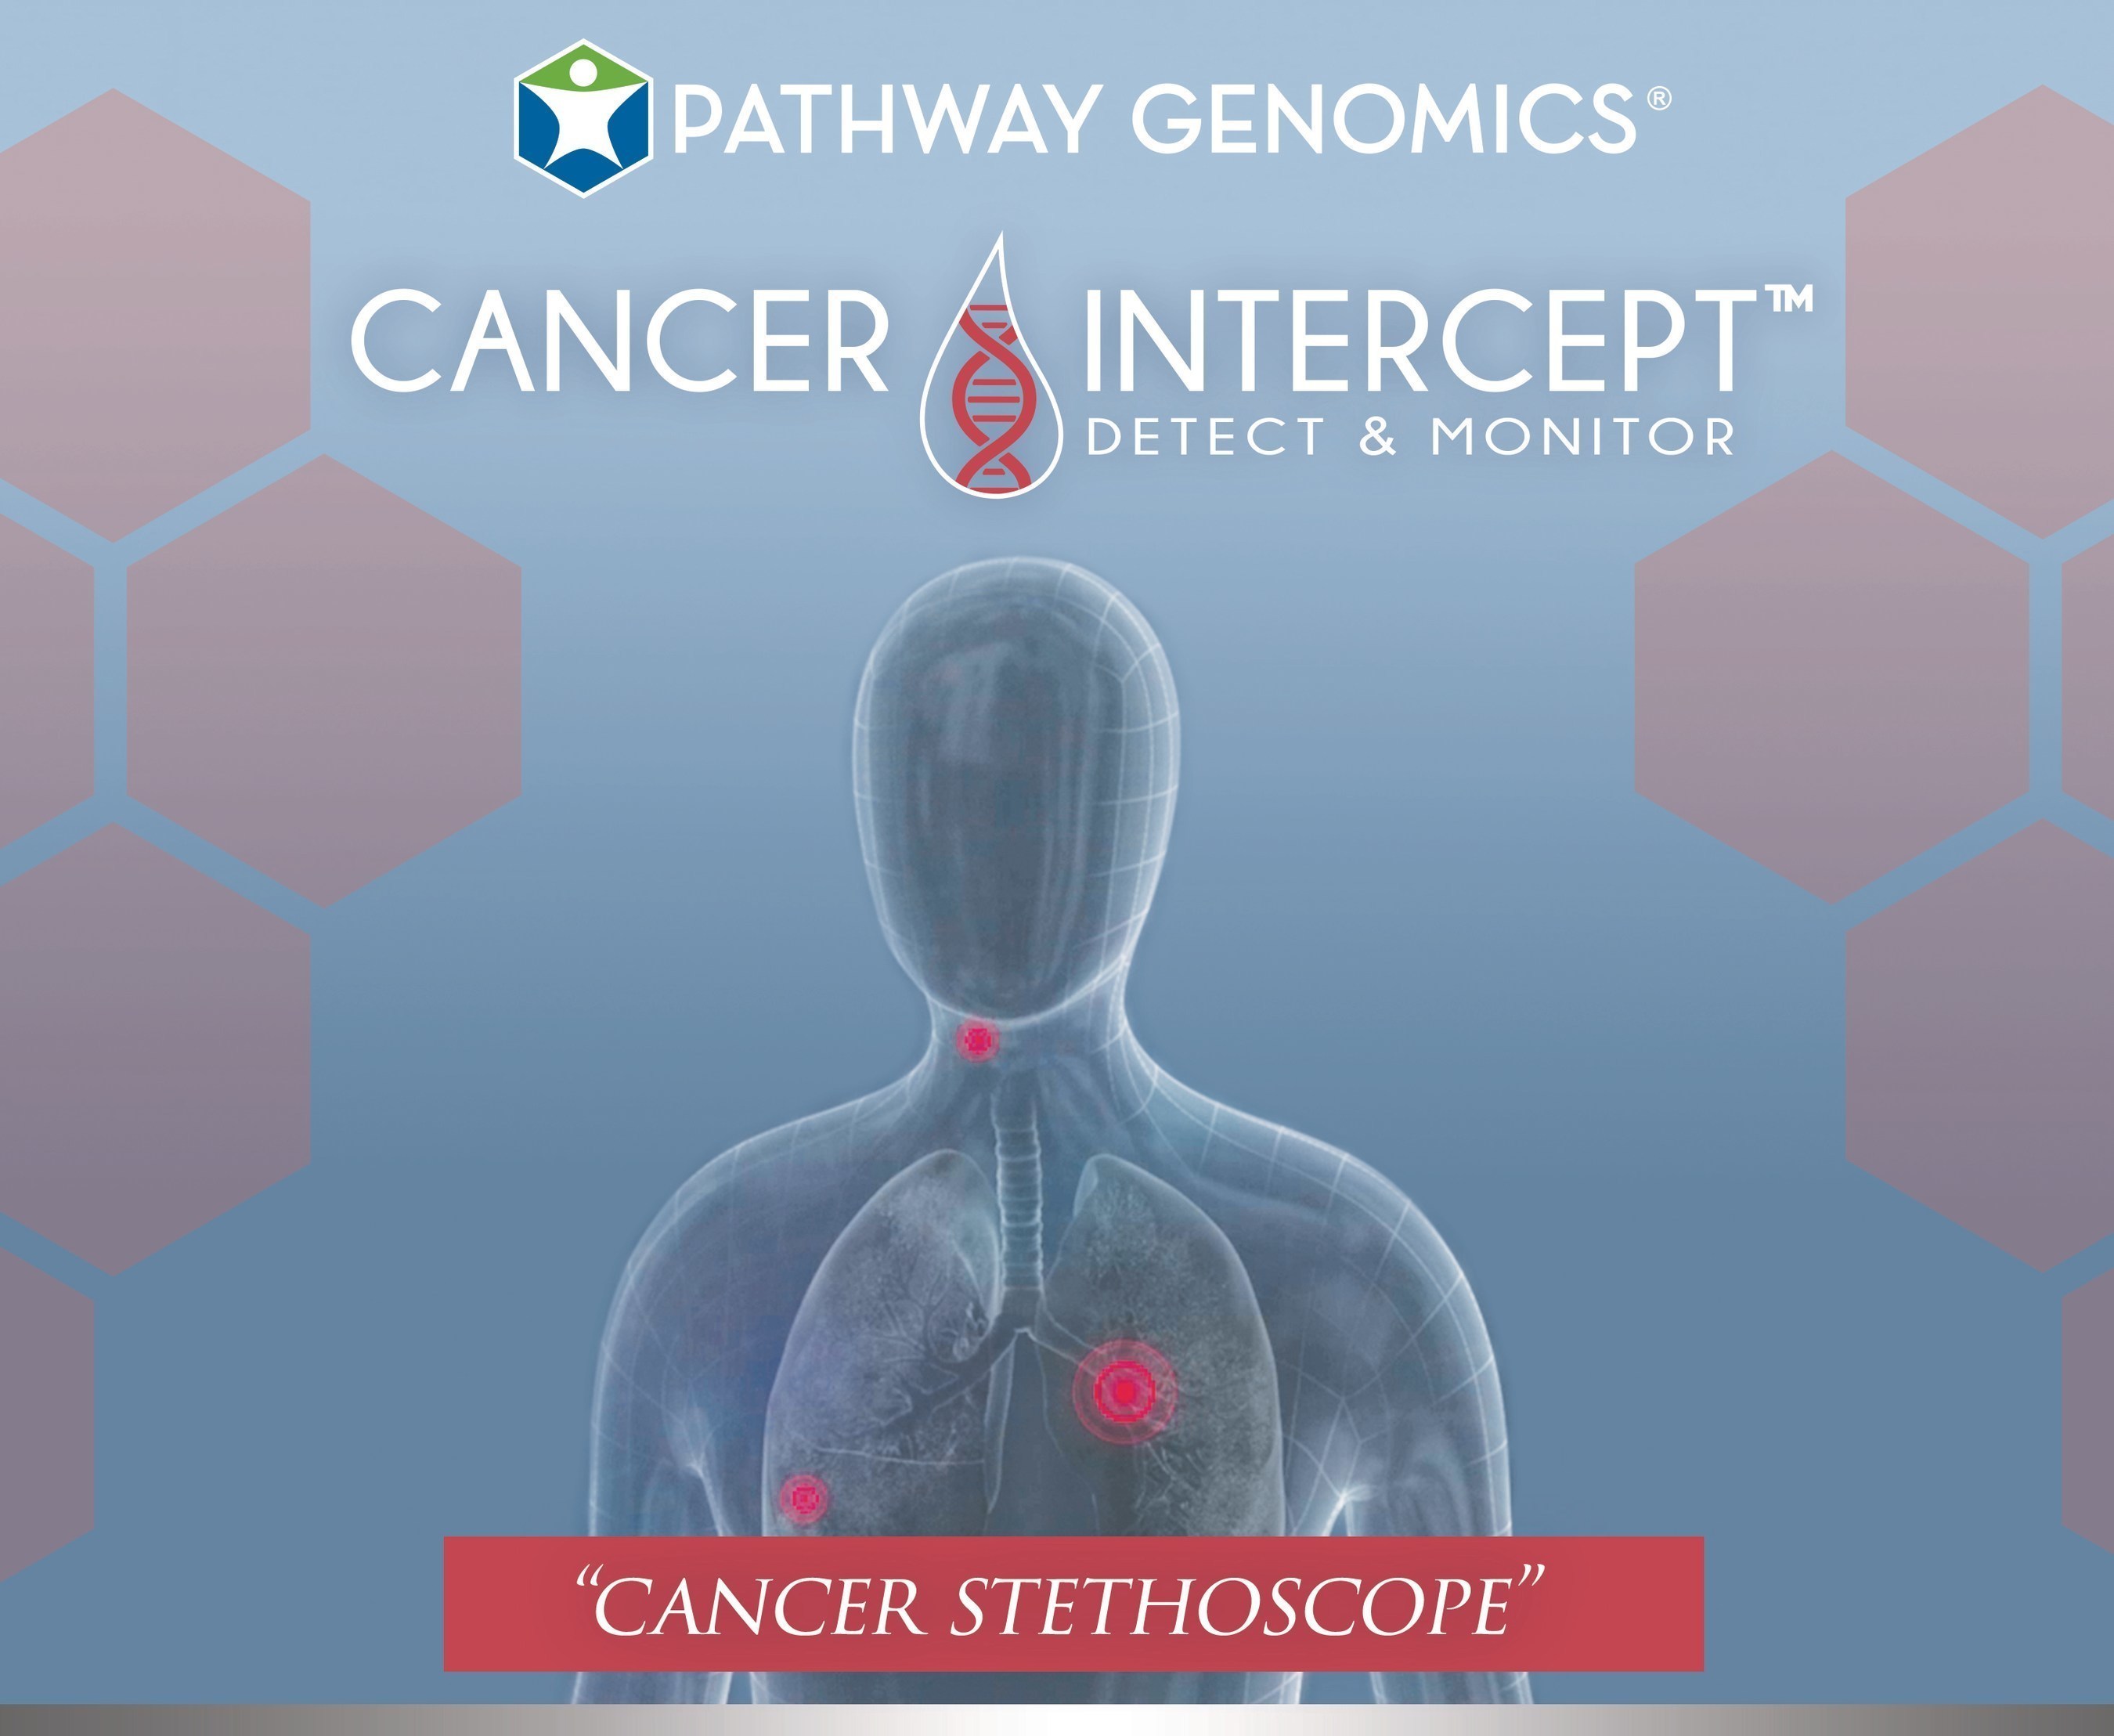 Pathway Genomics launches CancerIntercept, its first liquid biopsy, a non-invasive screening test designed for early cancer detection and monitoring.